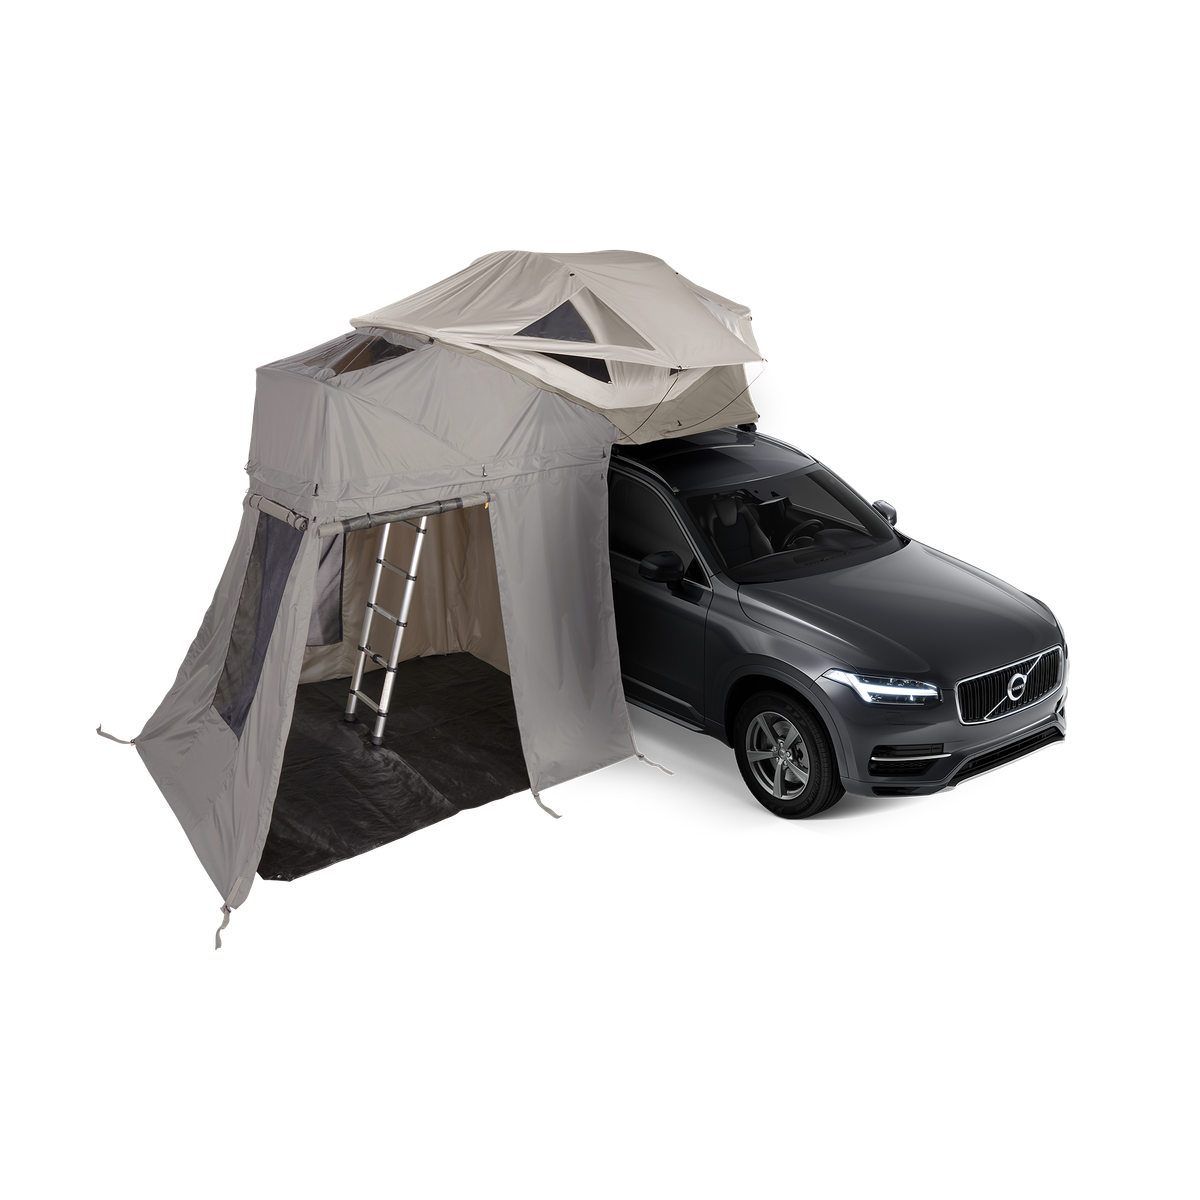 Thule Approach Annex roof top tent annex